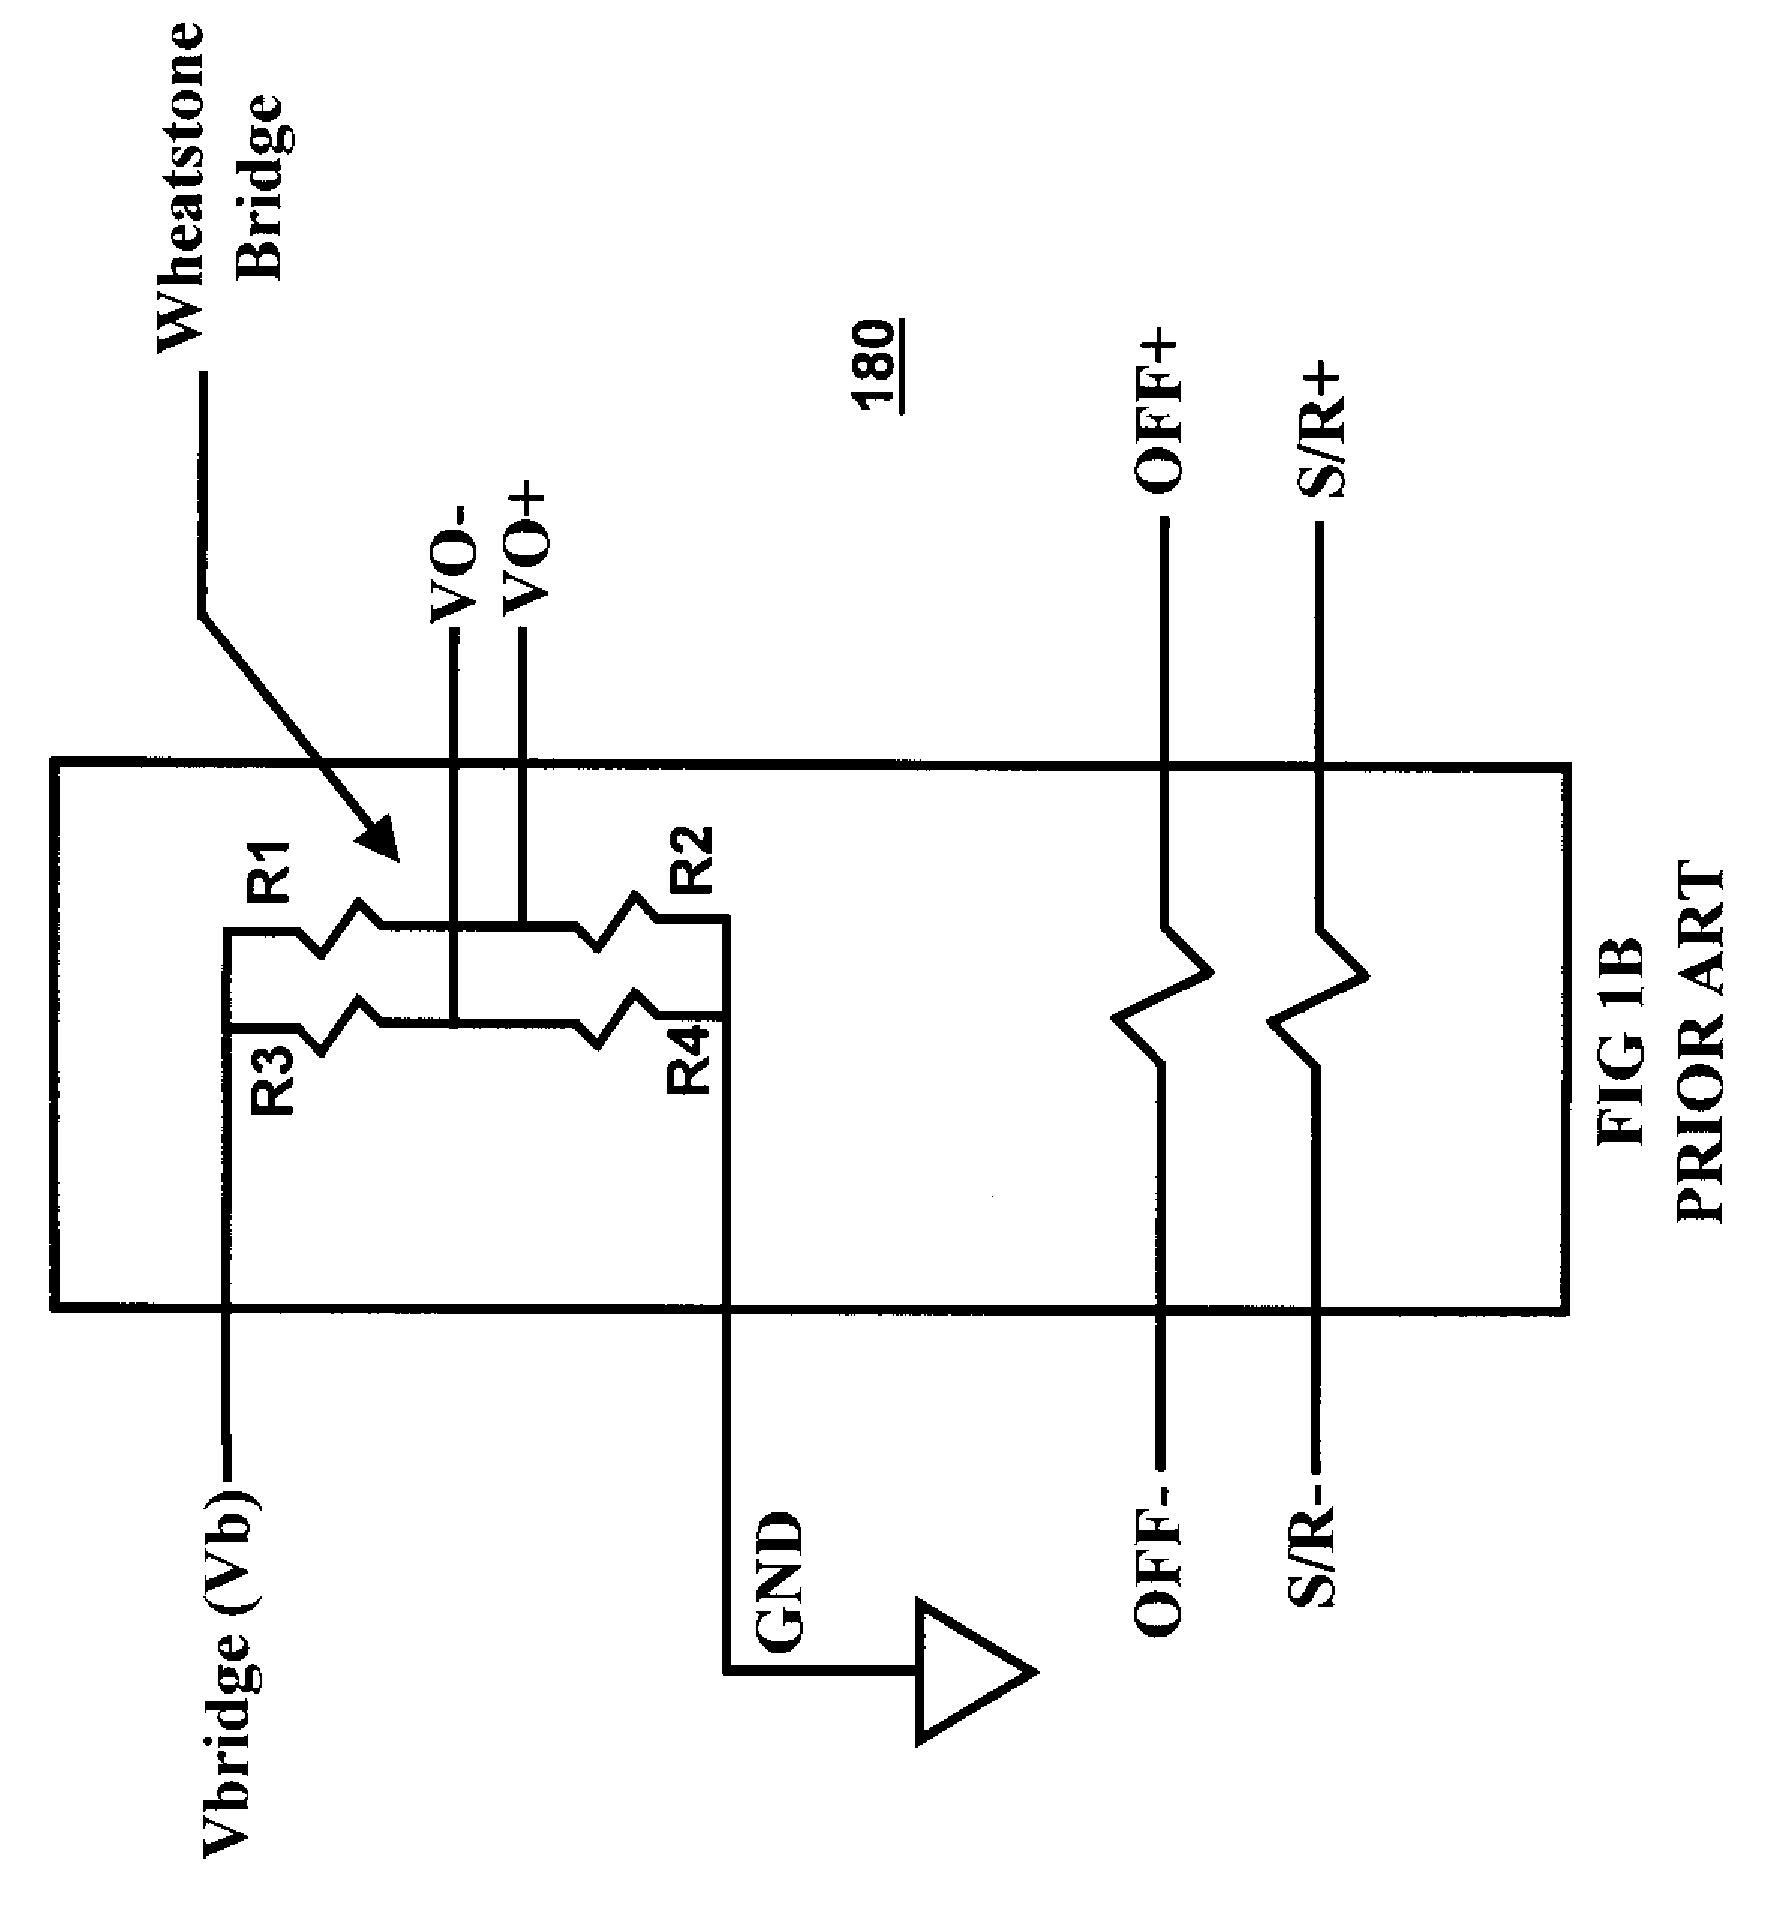 Non-contact magnetic pattern recognition sensor